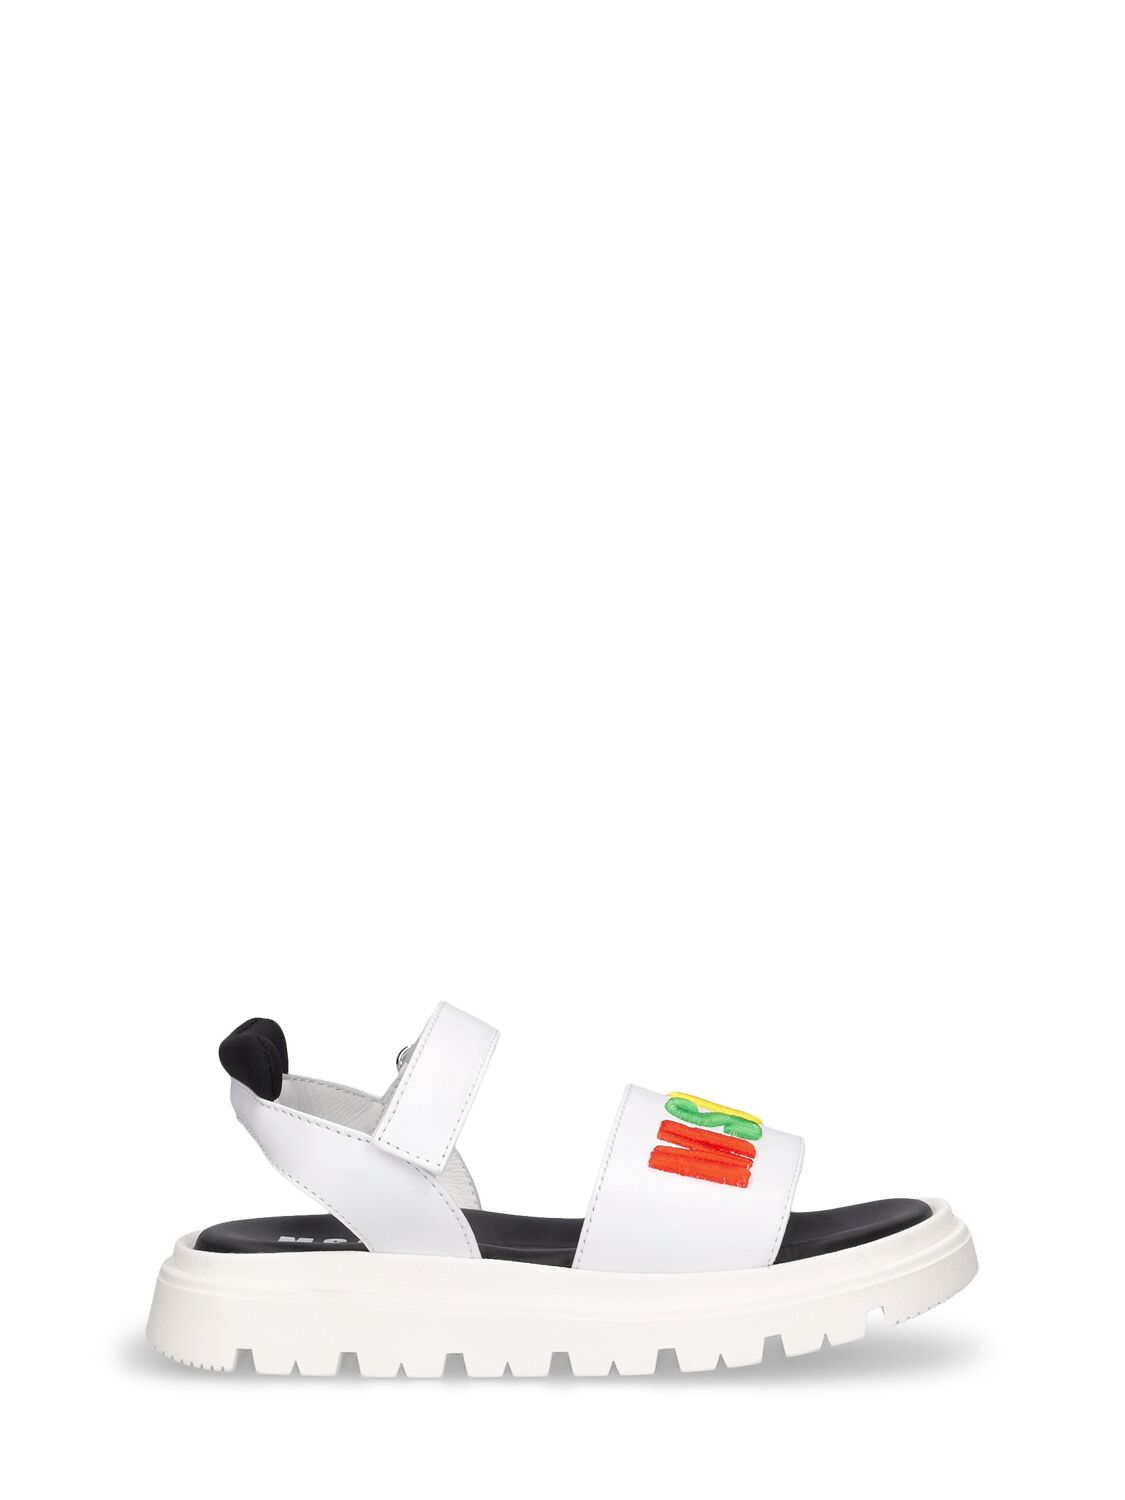 Image of Logo Print Leather Strap Sandals